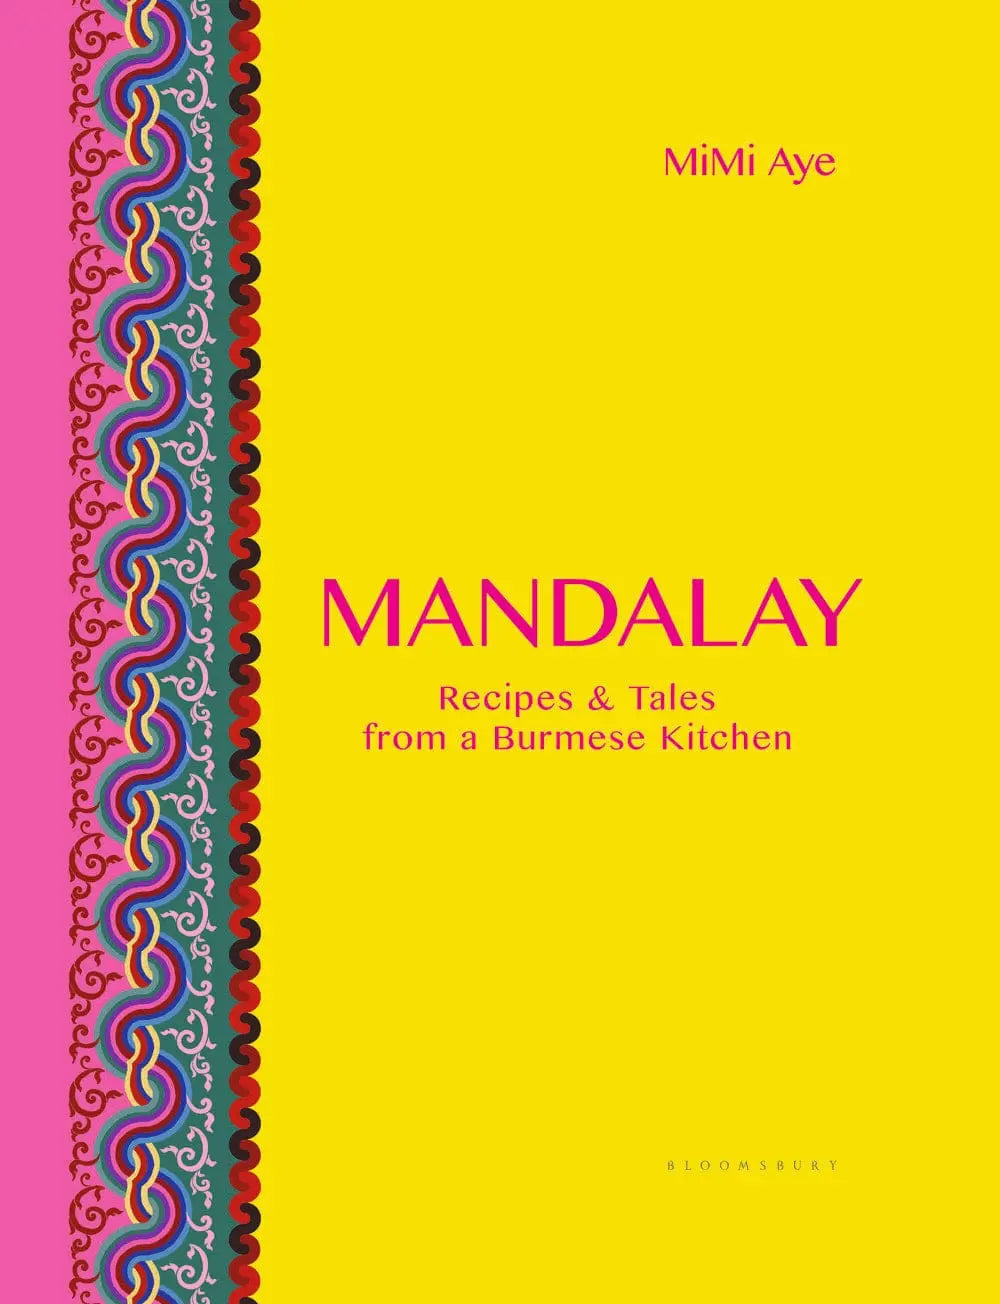 Mandalay: Recipes and Tales from a Burmese Kitchen - Migration Museum Shop